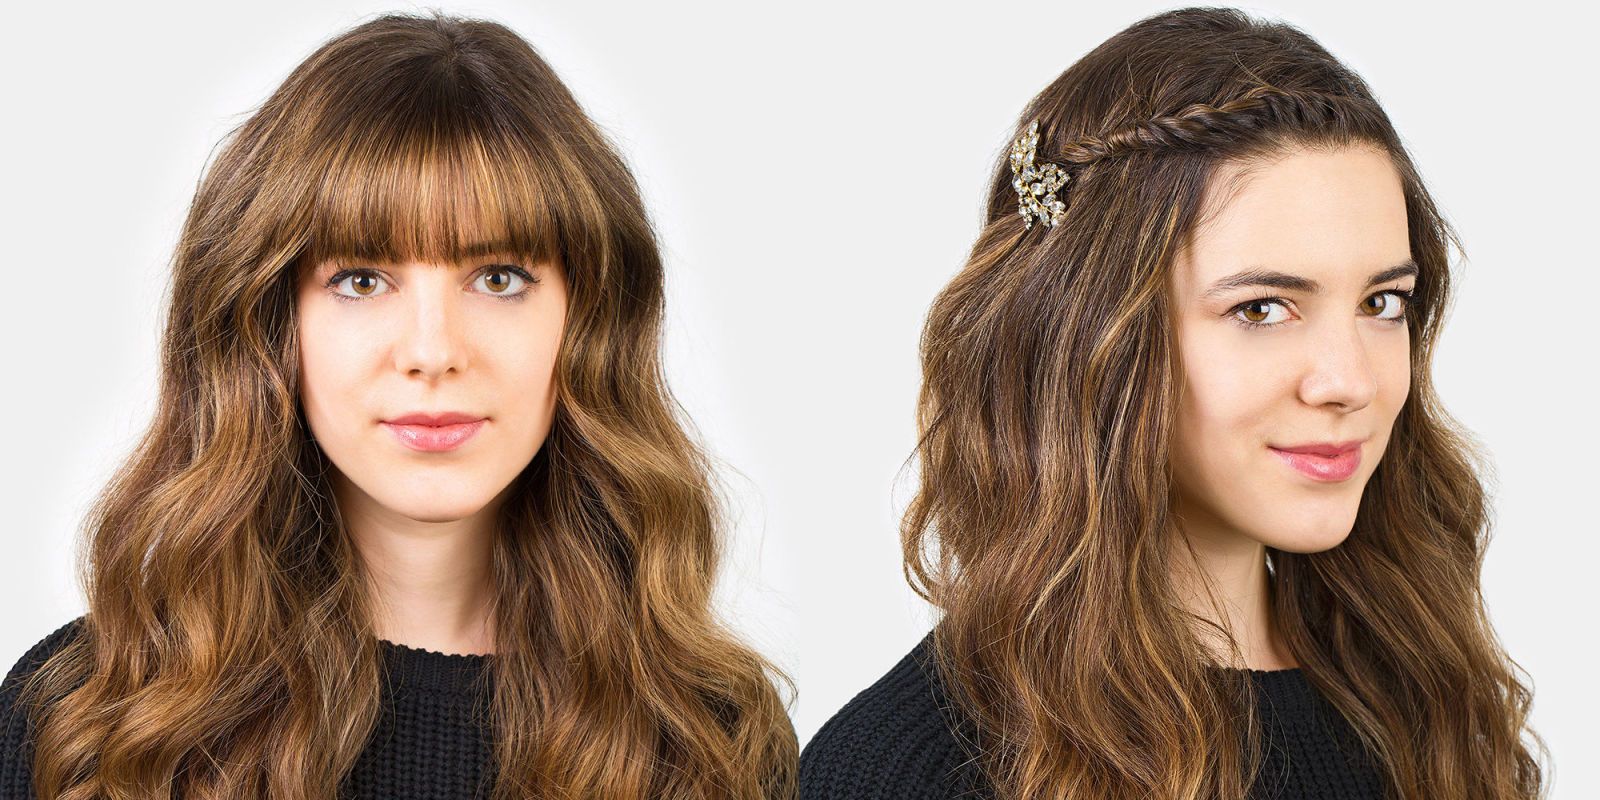 How to Style Bangs - 5 Hairstyles to 